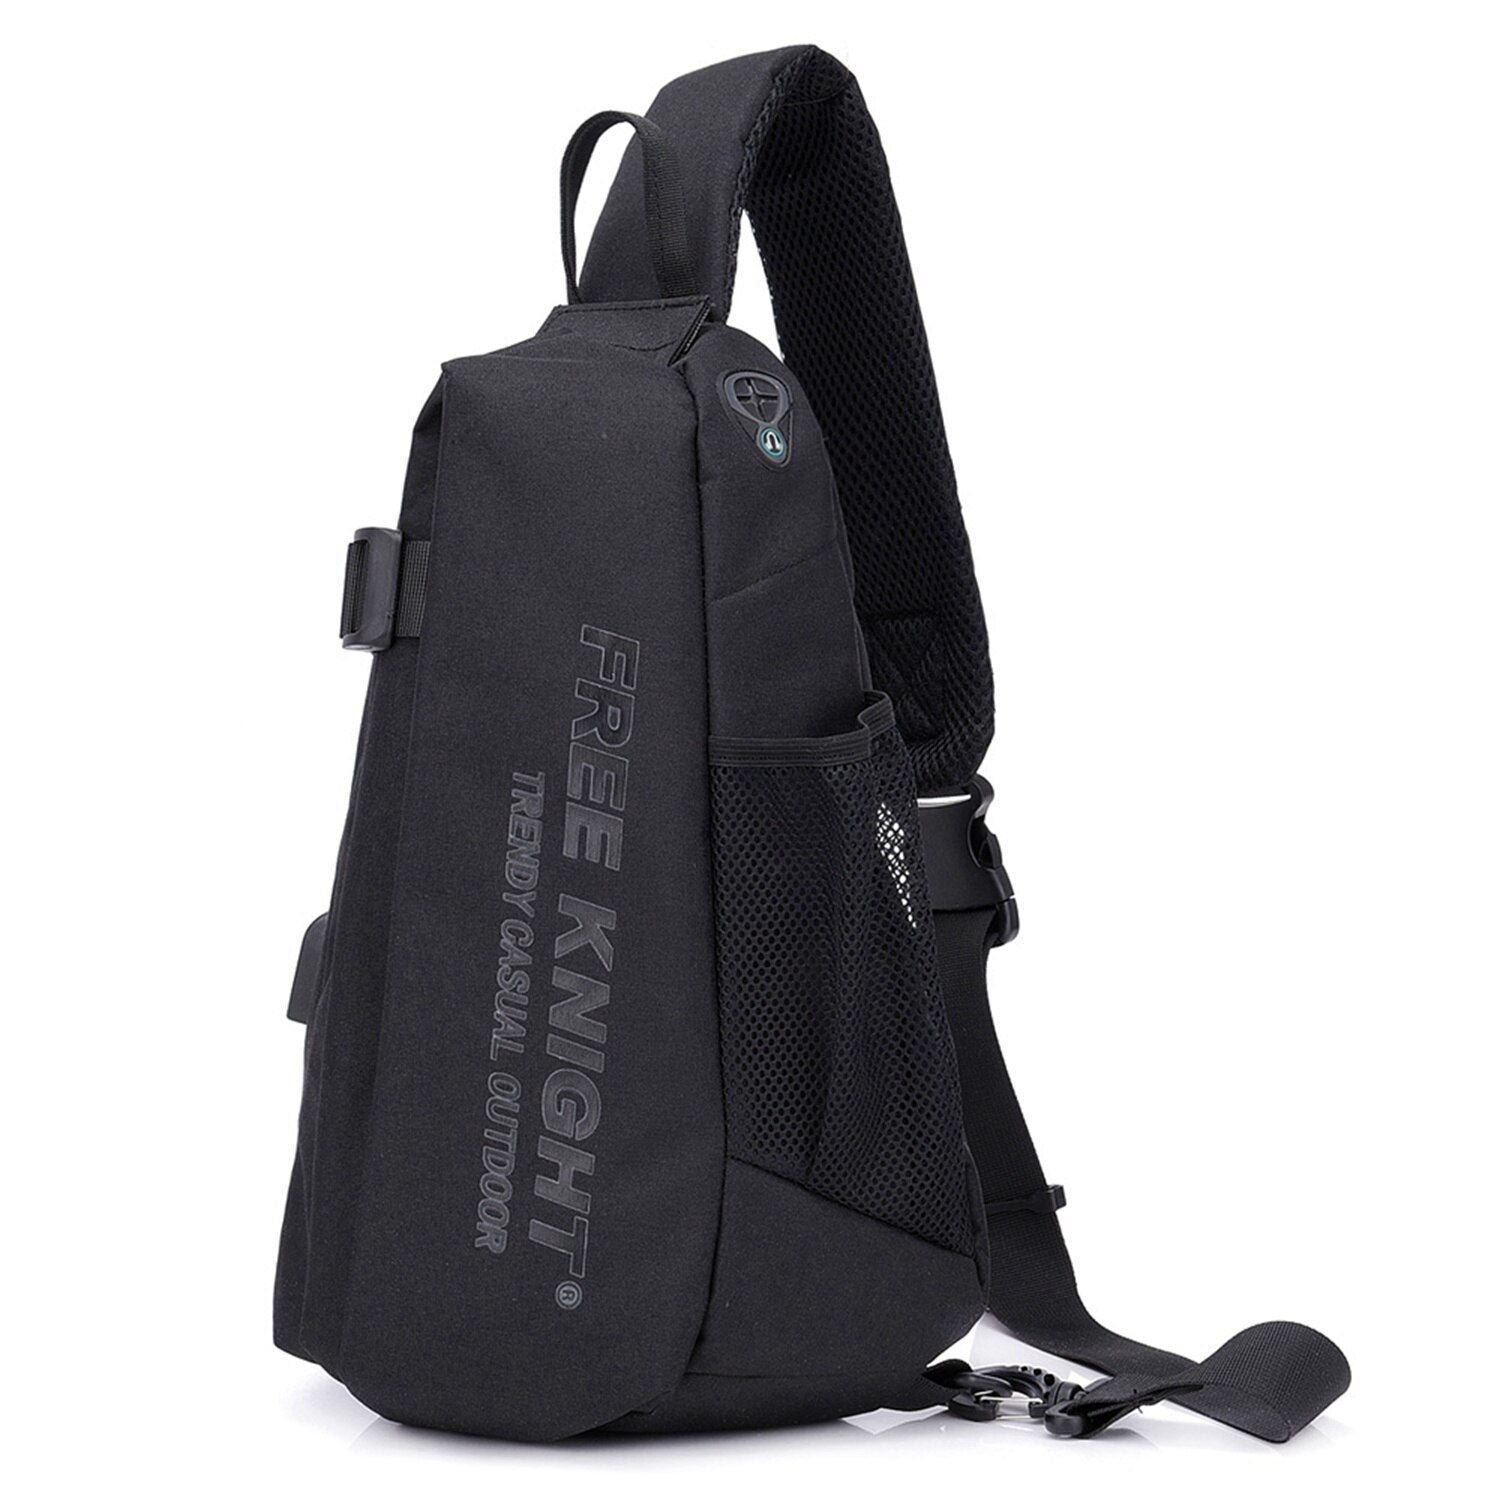 Free Knight Large Usb Charging Chest Bags Outdoor Waterproof Anti-Theft Fashion Shoulder Messenger Crossbody Bags Travel - ebowsos